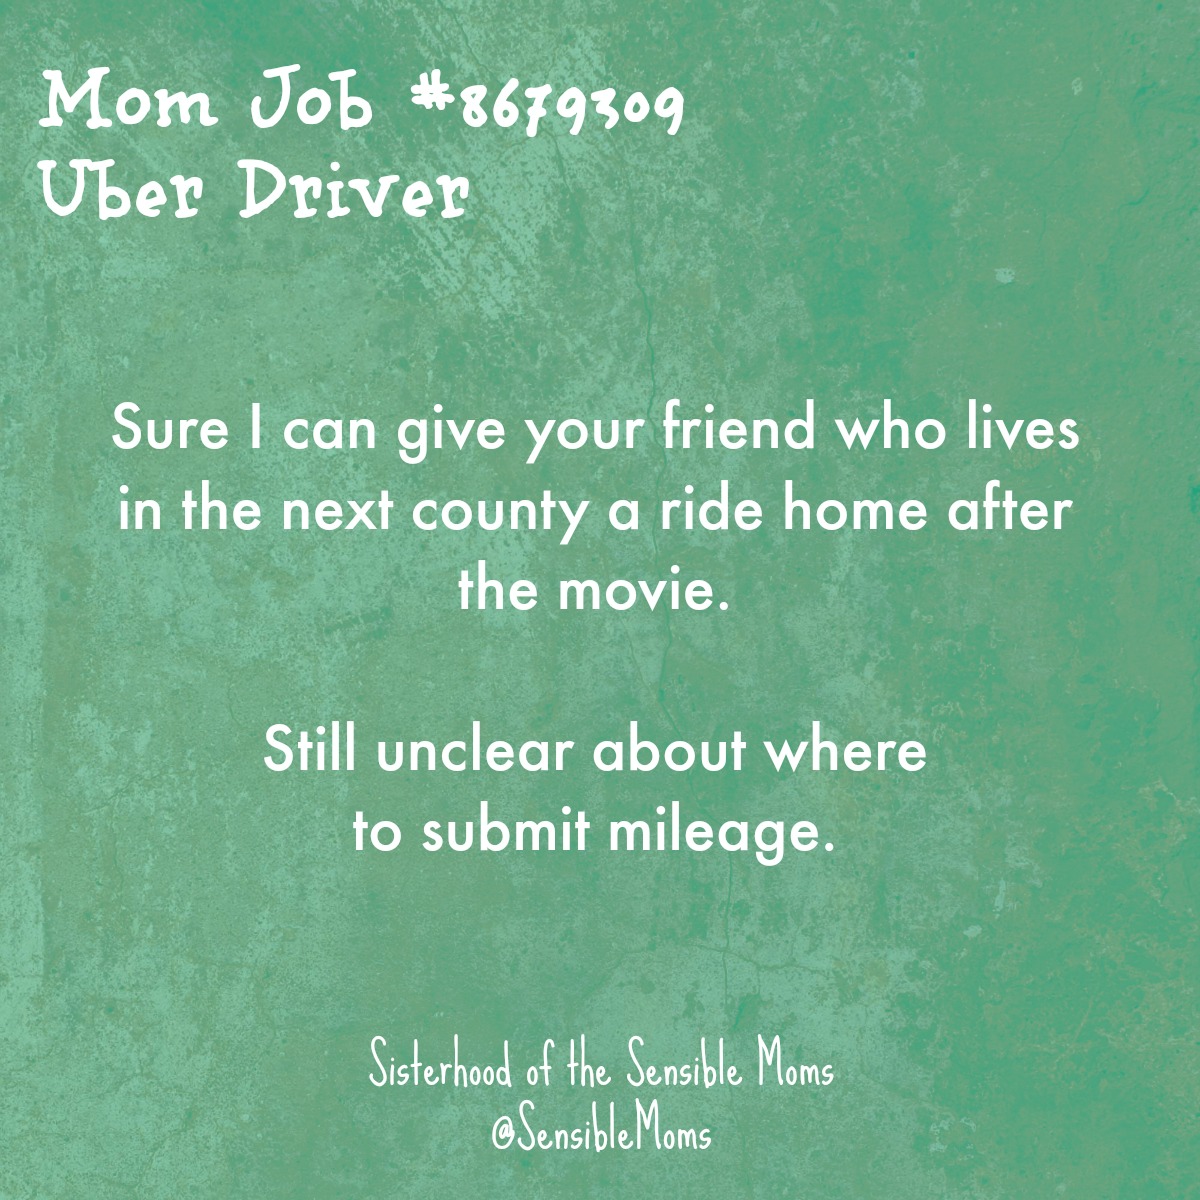 Being a mother means being a Jacqueline of All Trades . . . whether we want to be or not. But even if we can't get a little help, we can at least find the humor in these 13 Mom Jobs We All Can Relate To. | Sisterhood of the Sensible Moms